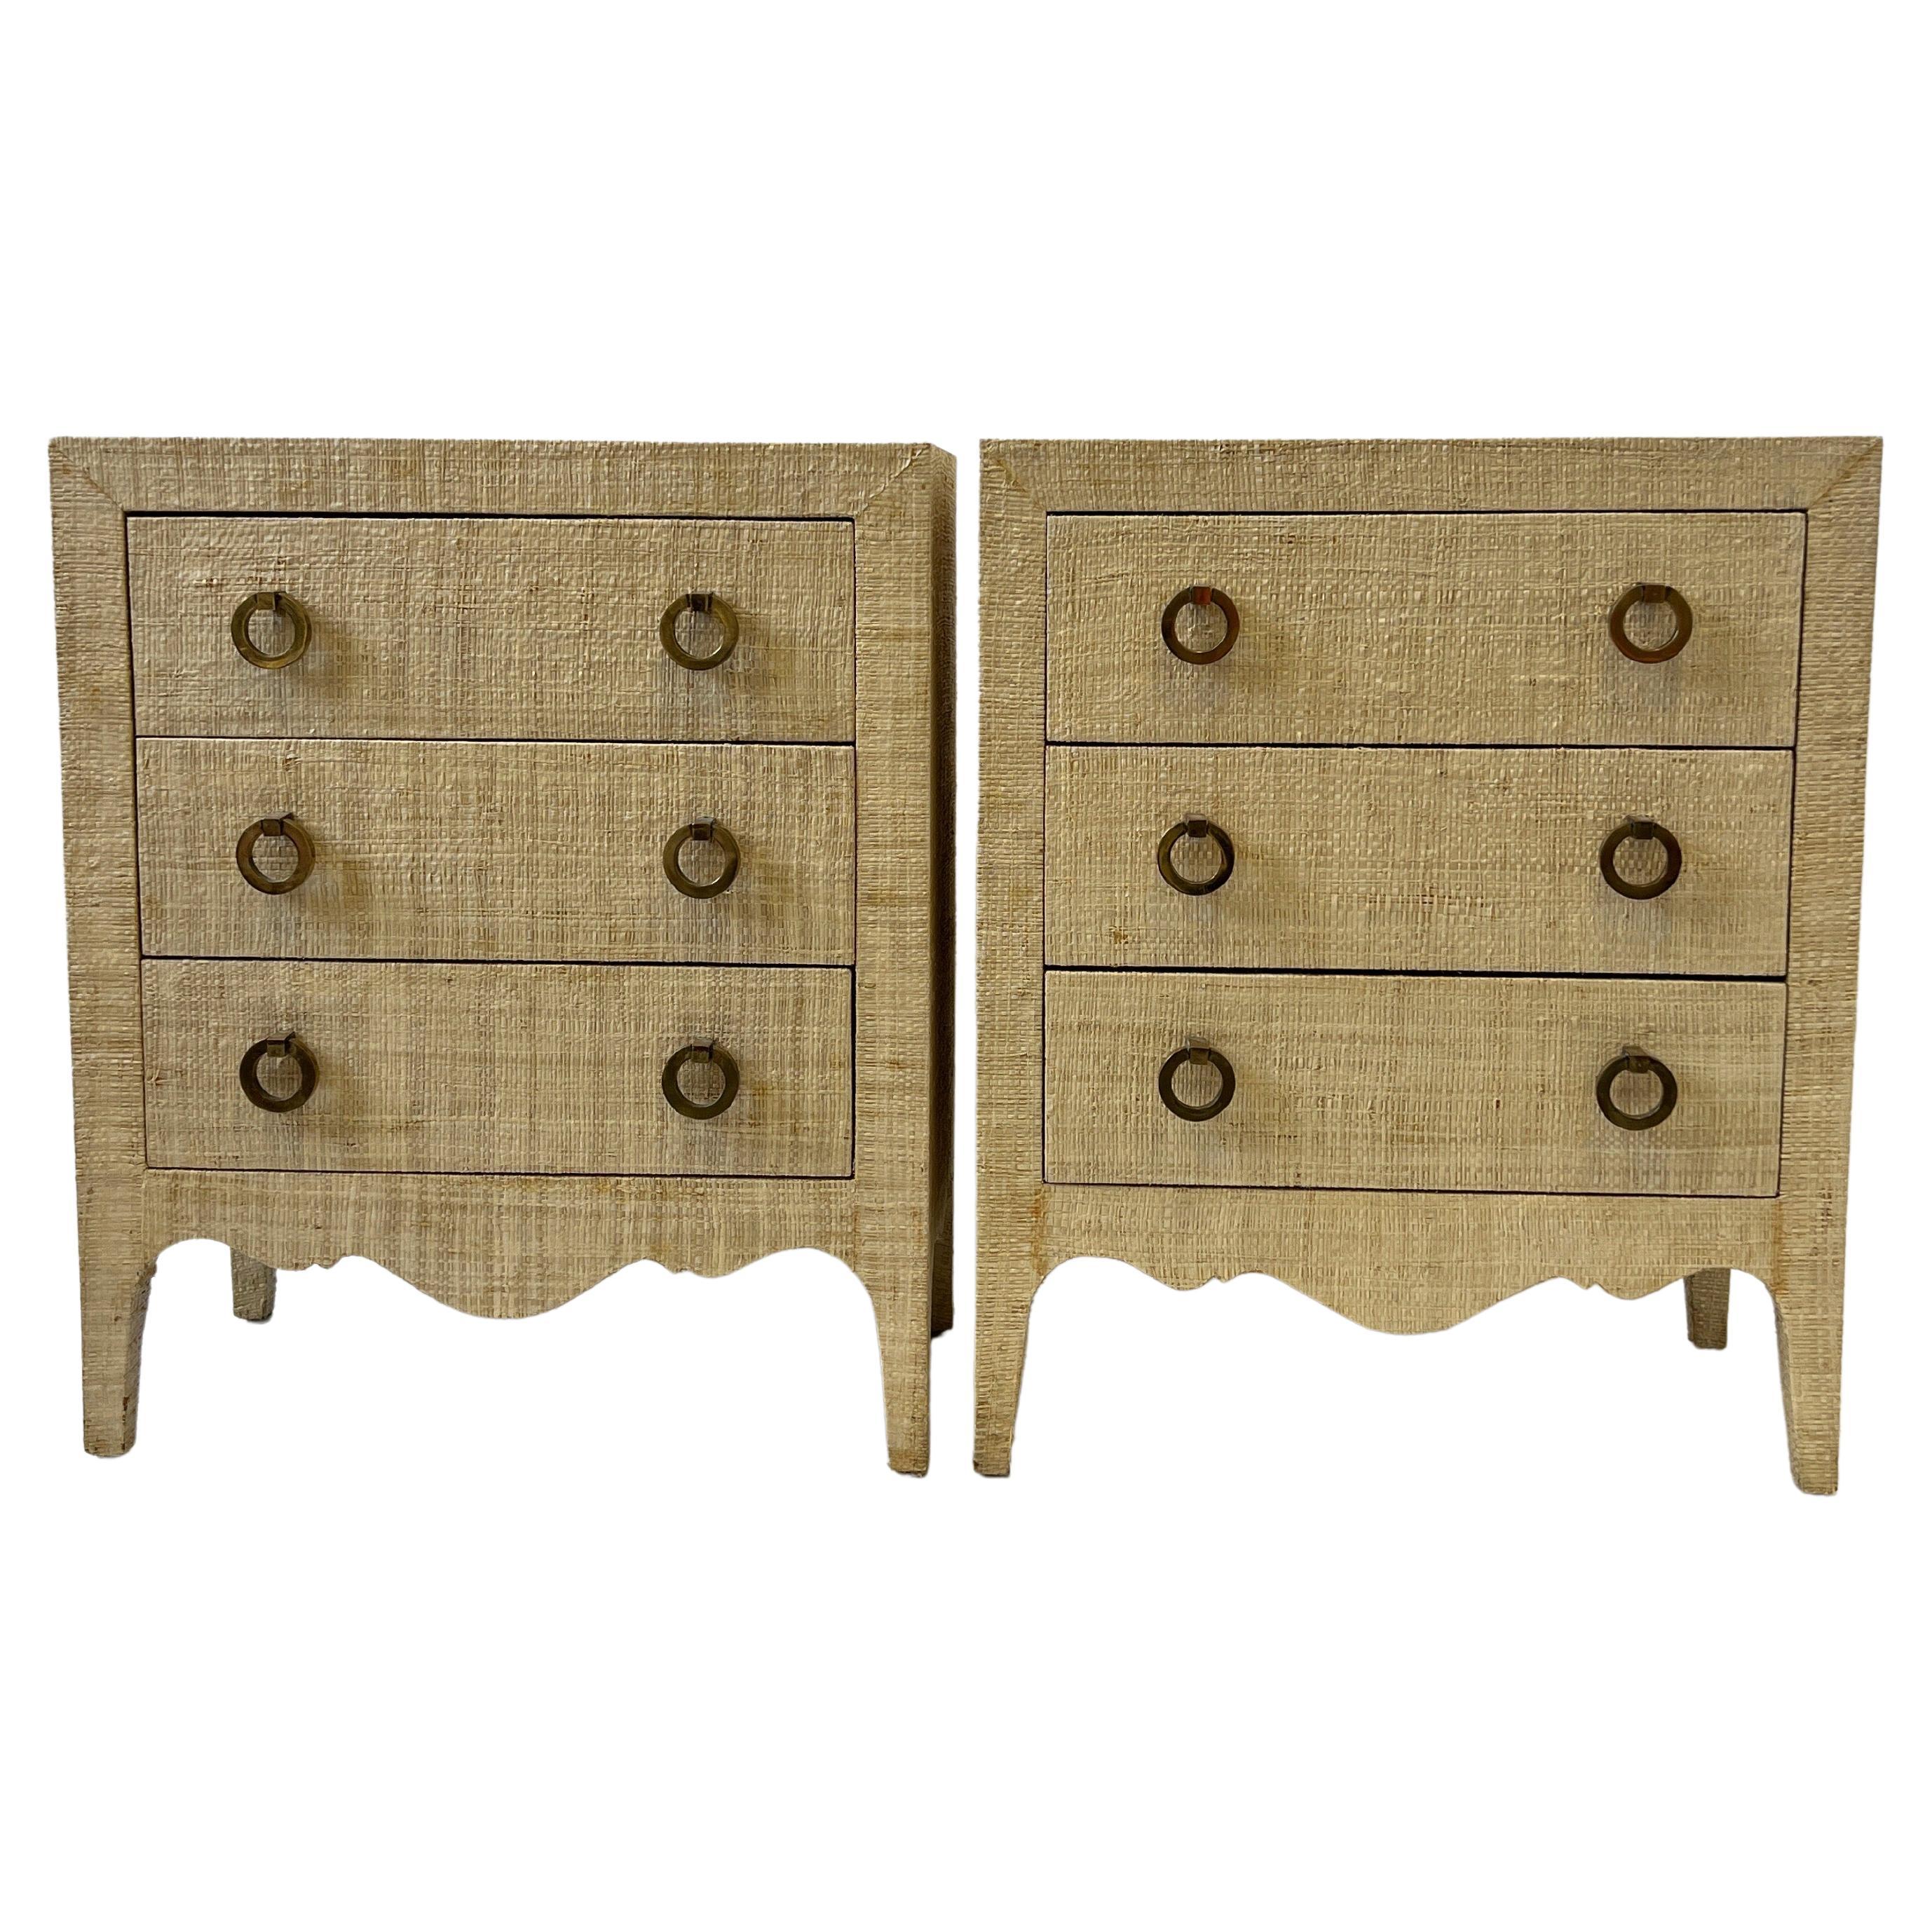 Pair of Grasscloth and Brass Night Stands